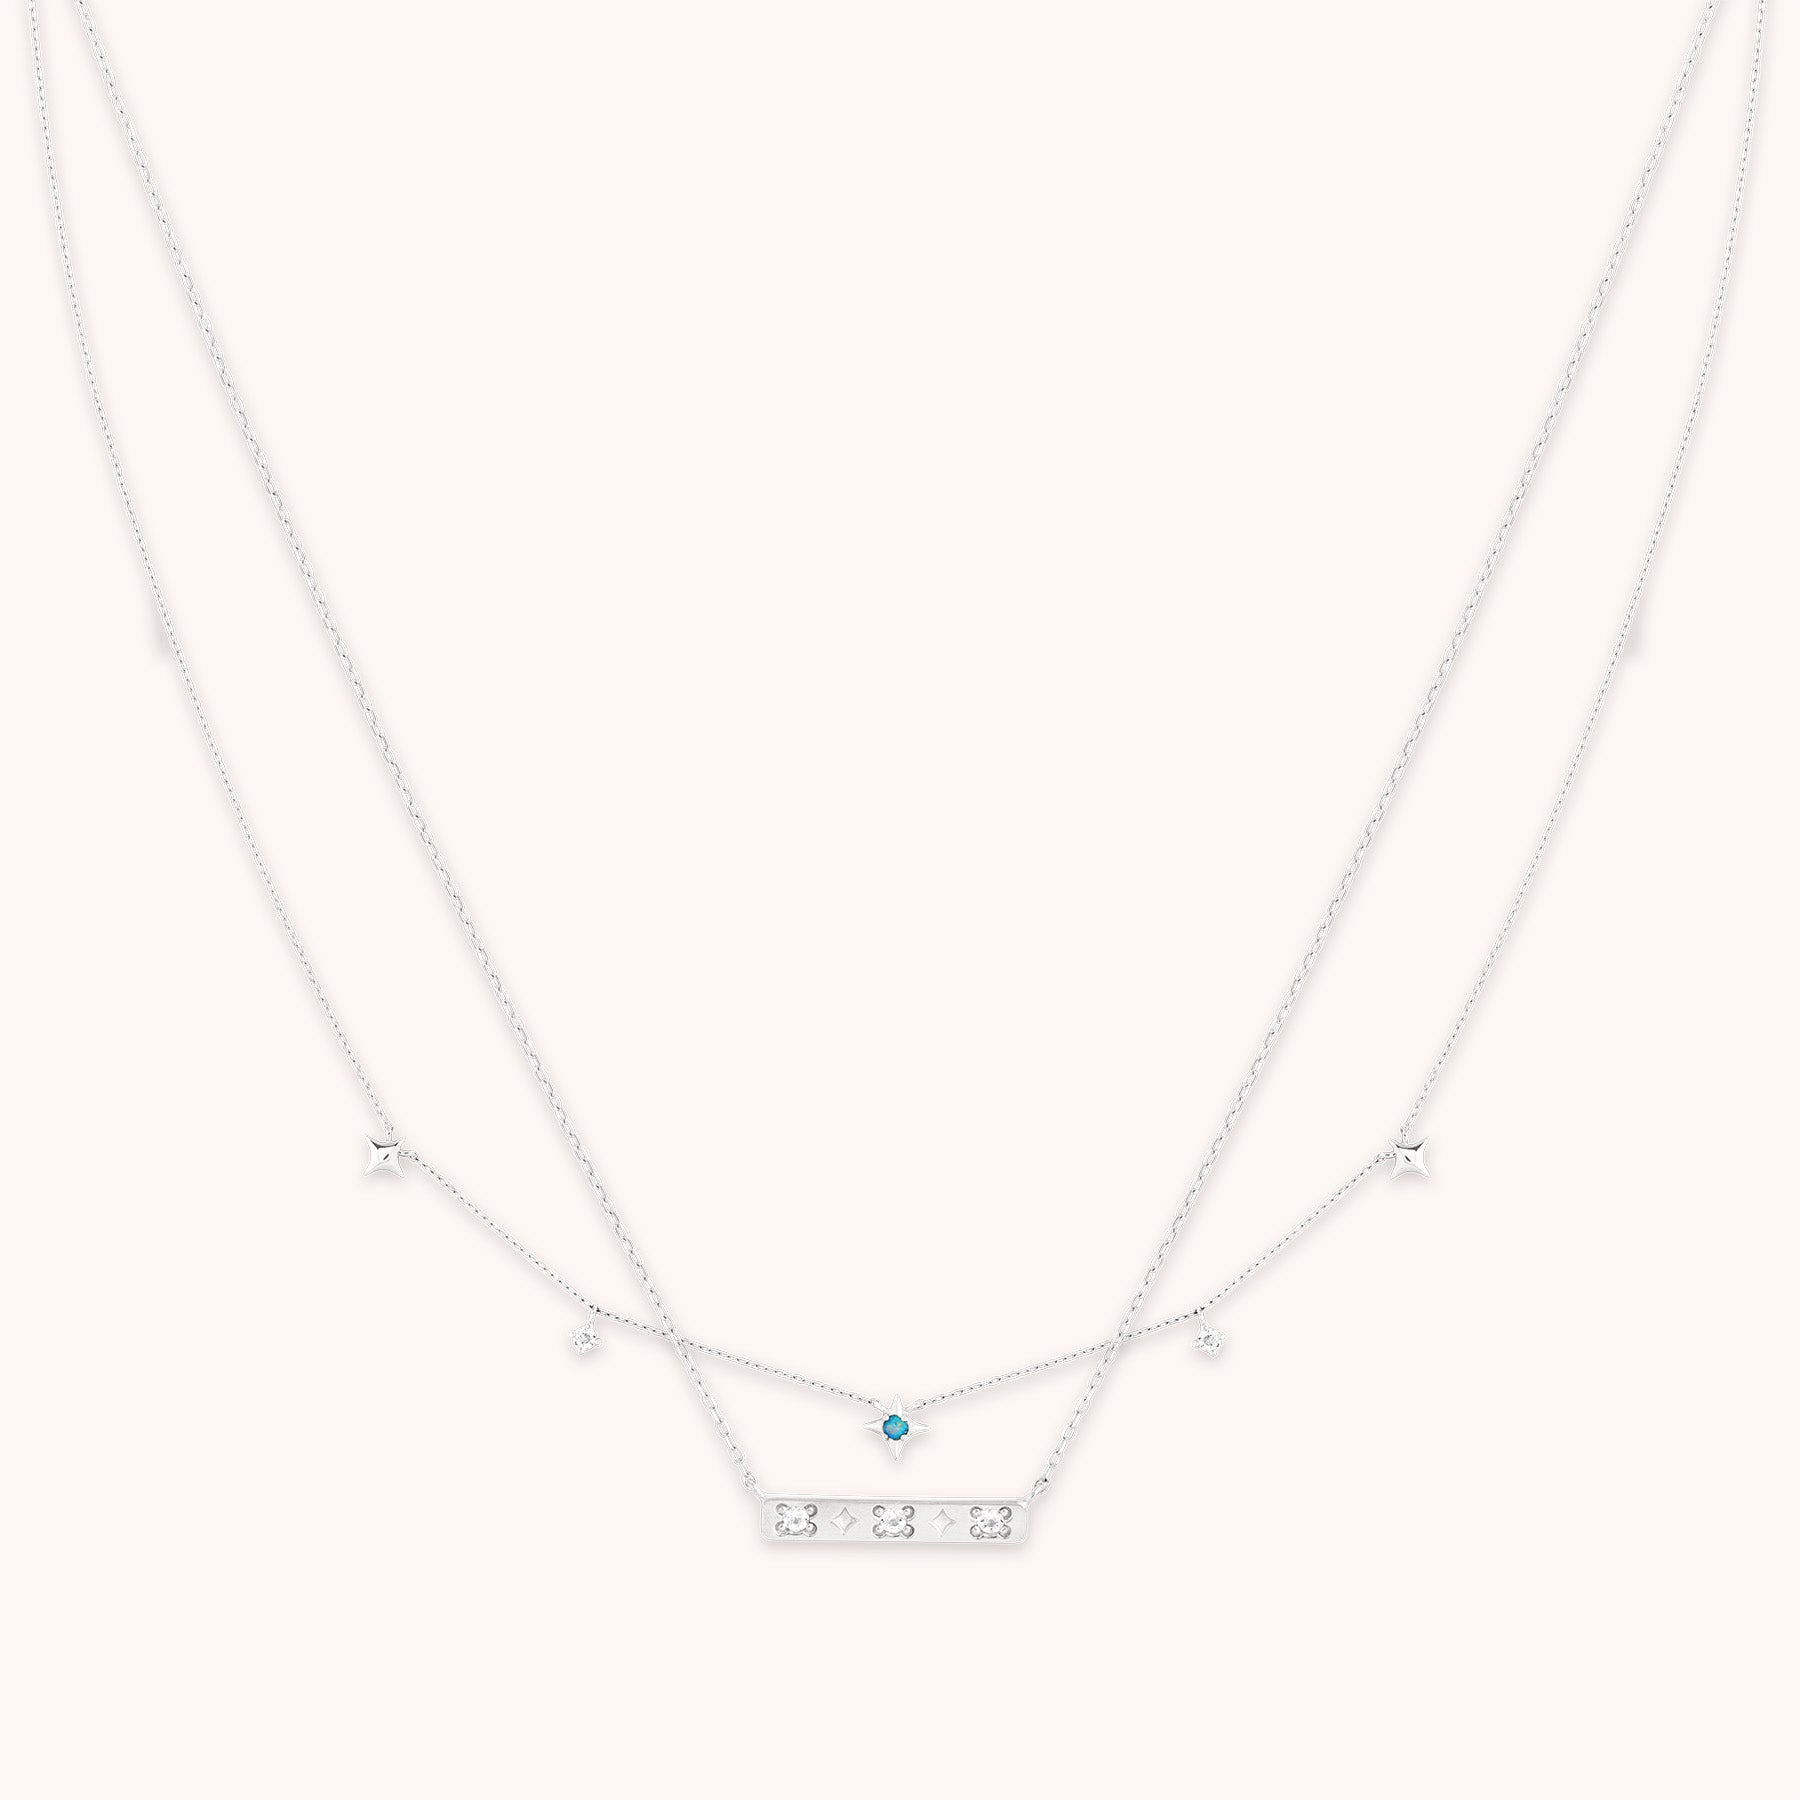 Cosmic Star Necklace Gift Set in Solid White Gold